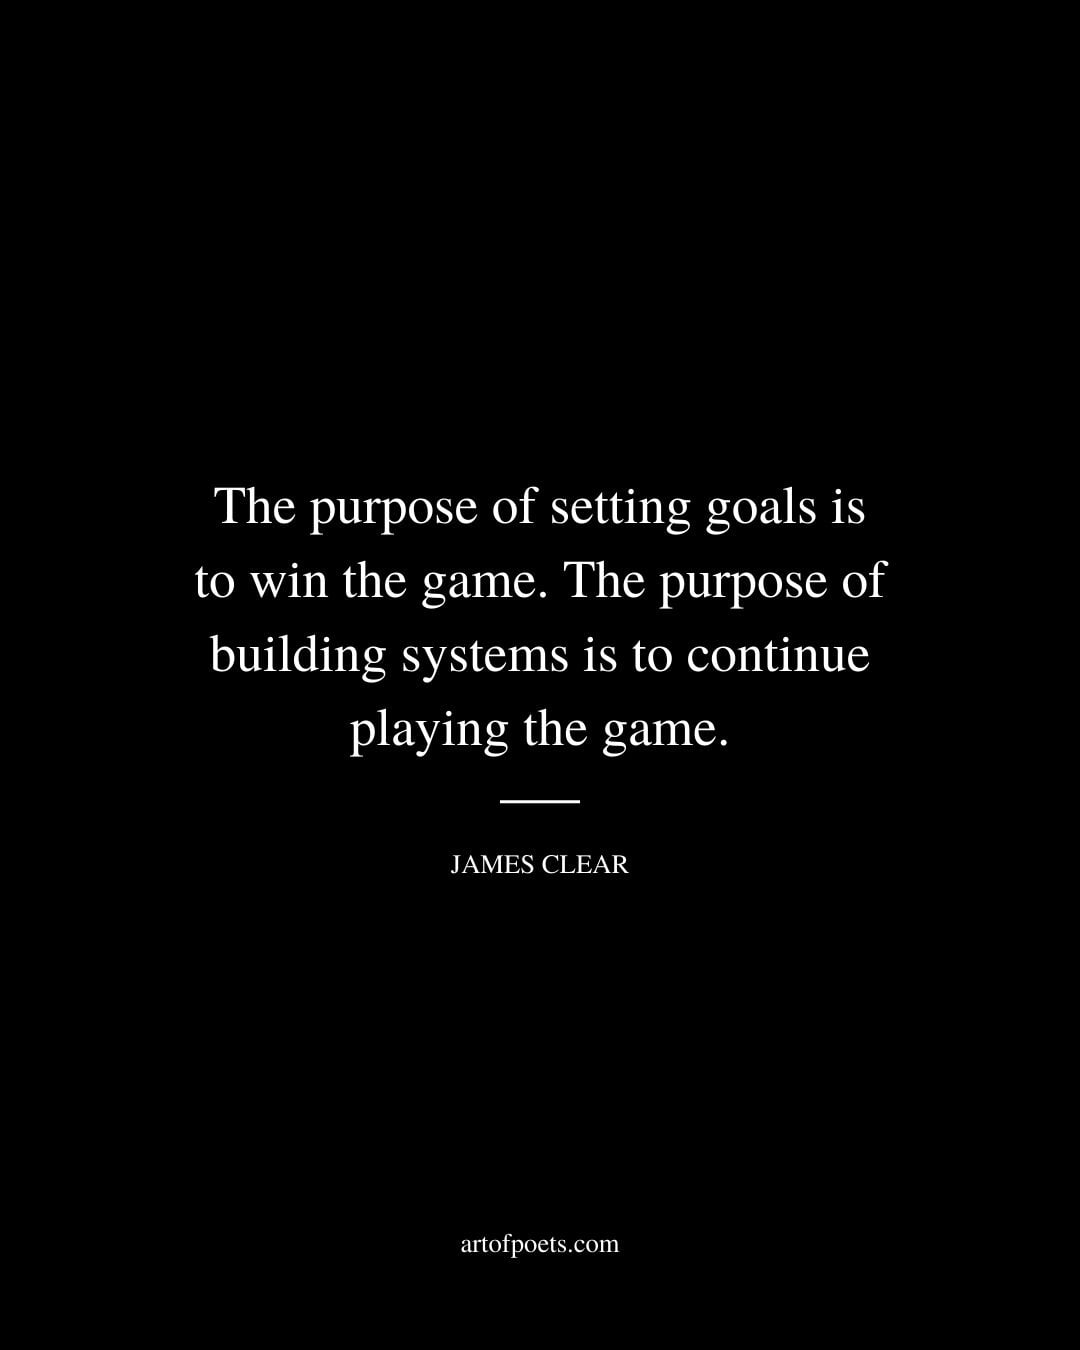 The purpose of setting goals is to win the game. The purpose of building systems is to continue playing the game